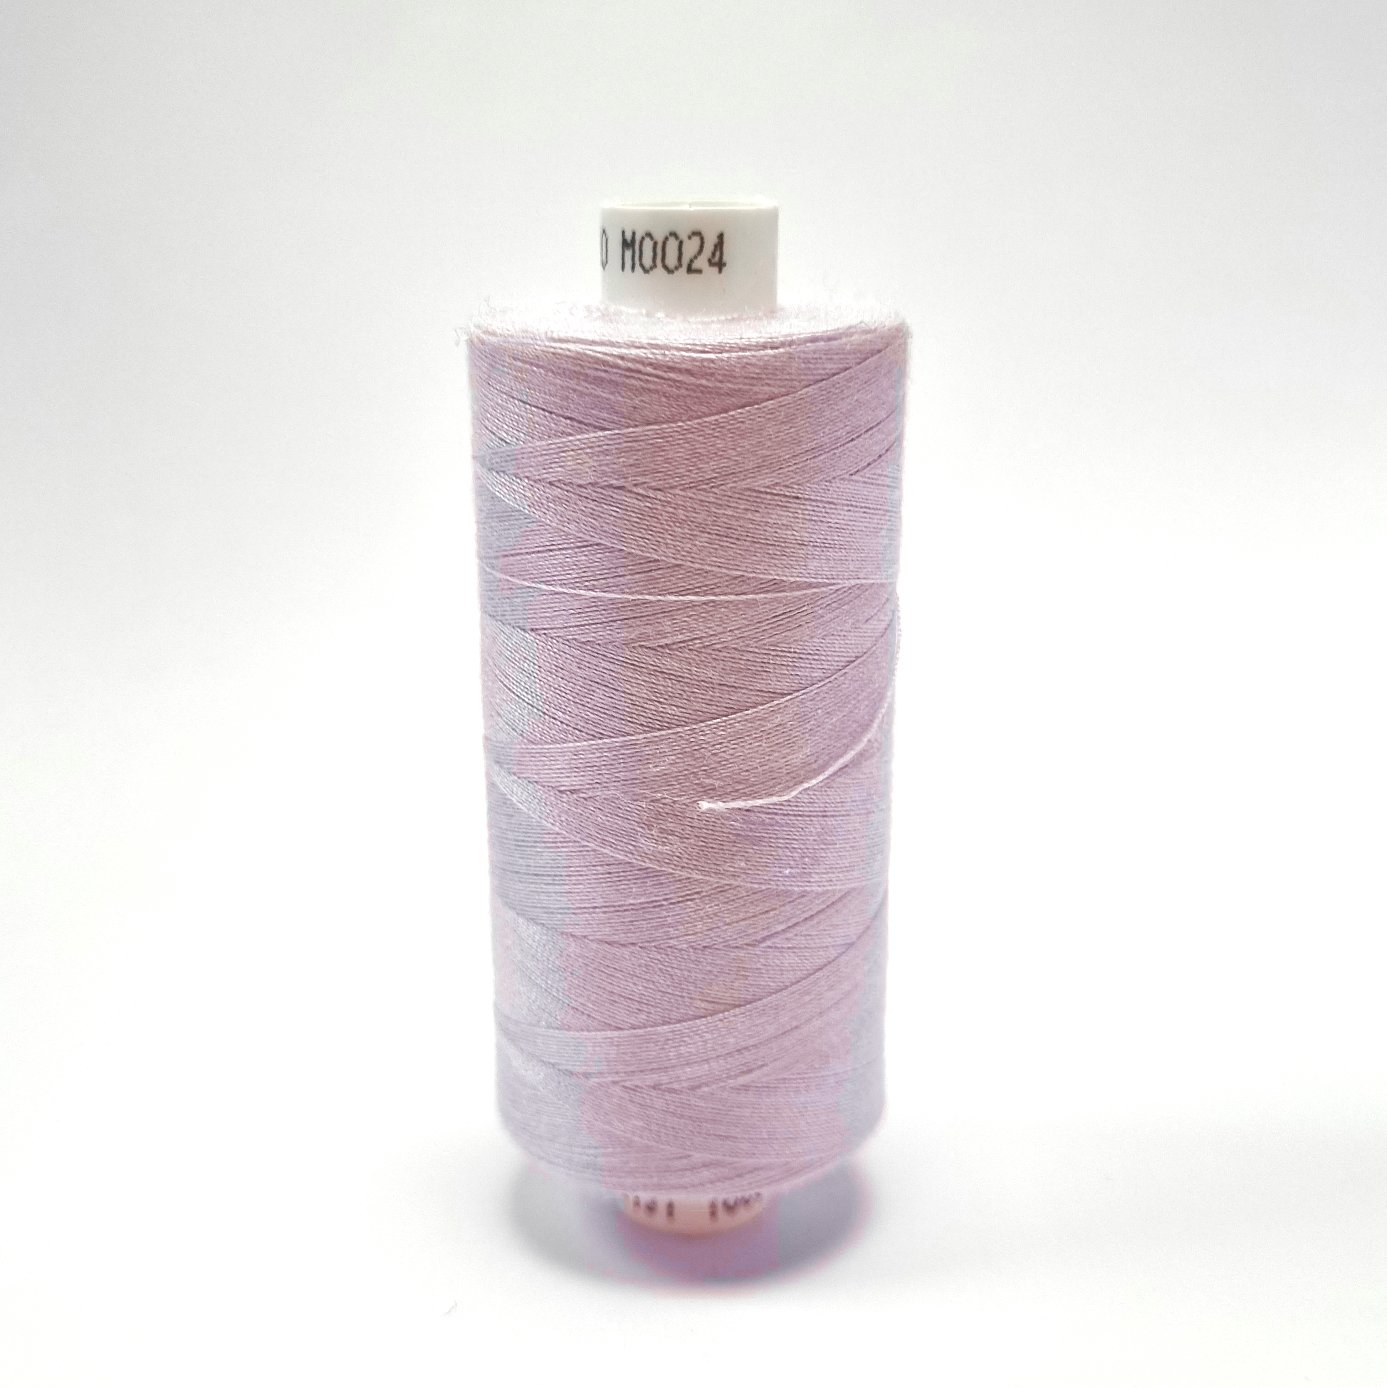 Moon Thread, Lilac, 1000 yard reels 99p from Jaycotts Sewing Supplies